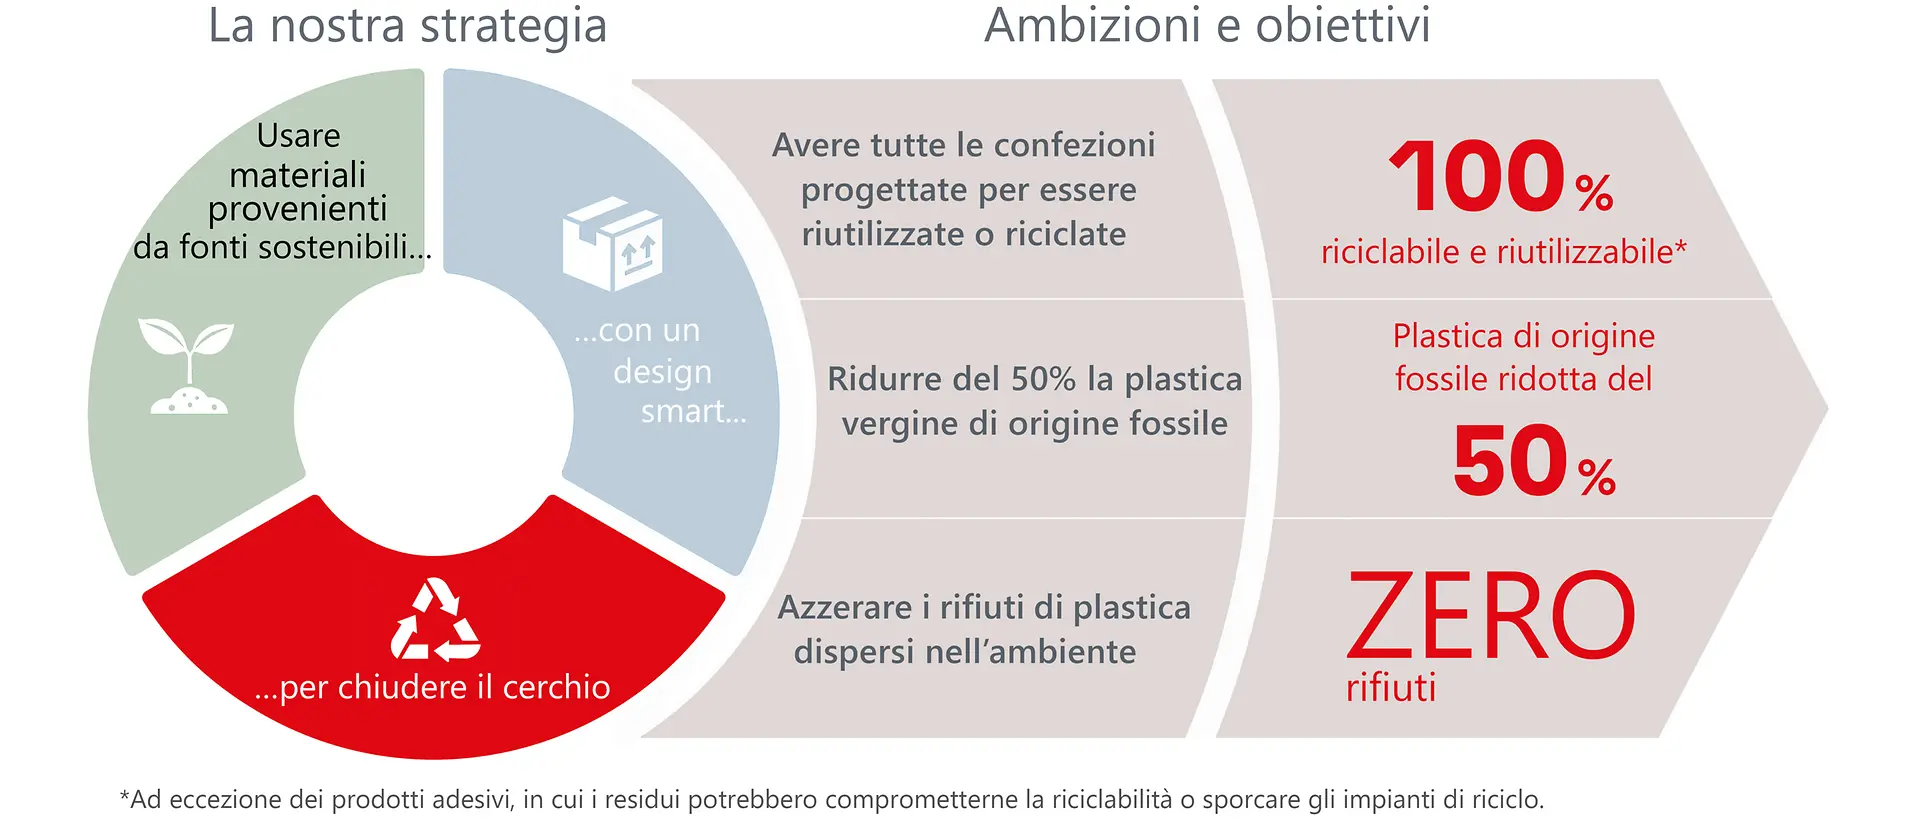 sustainability-packaging-strategy-strategia-packaging-sostenibile-it